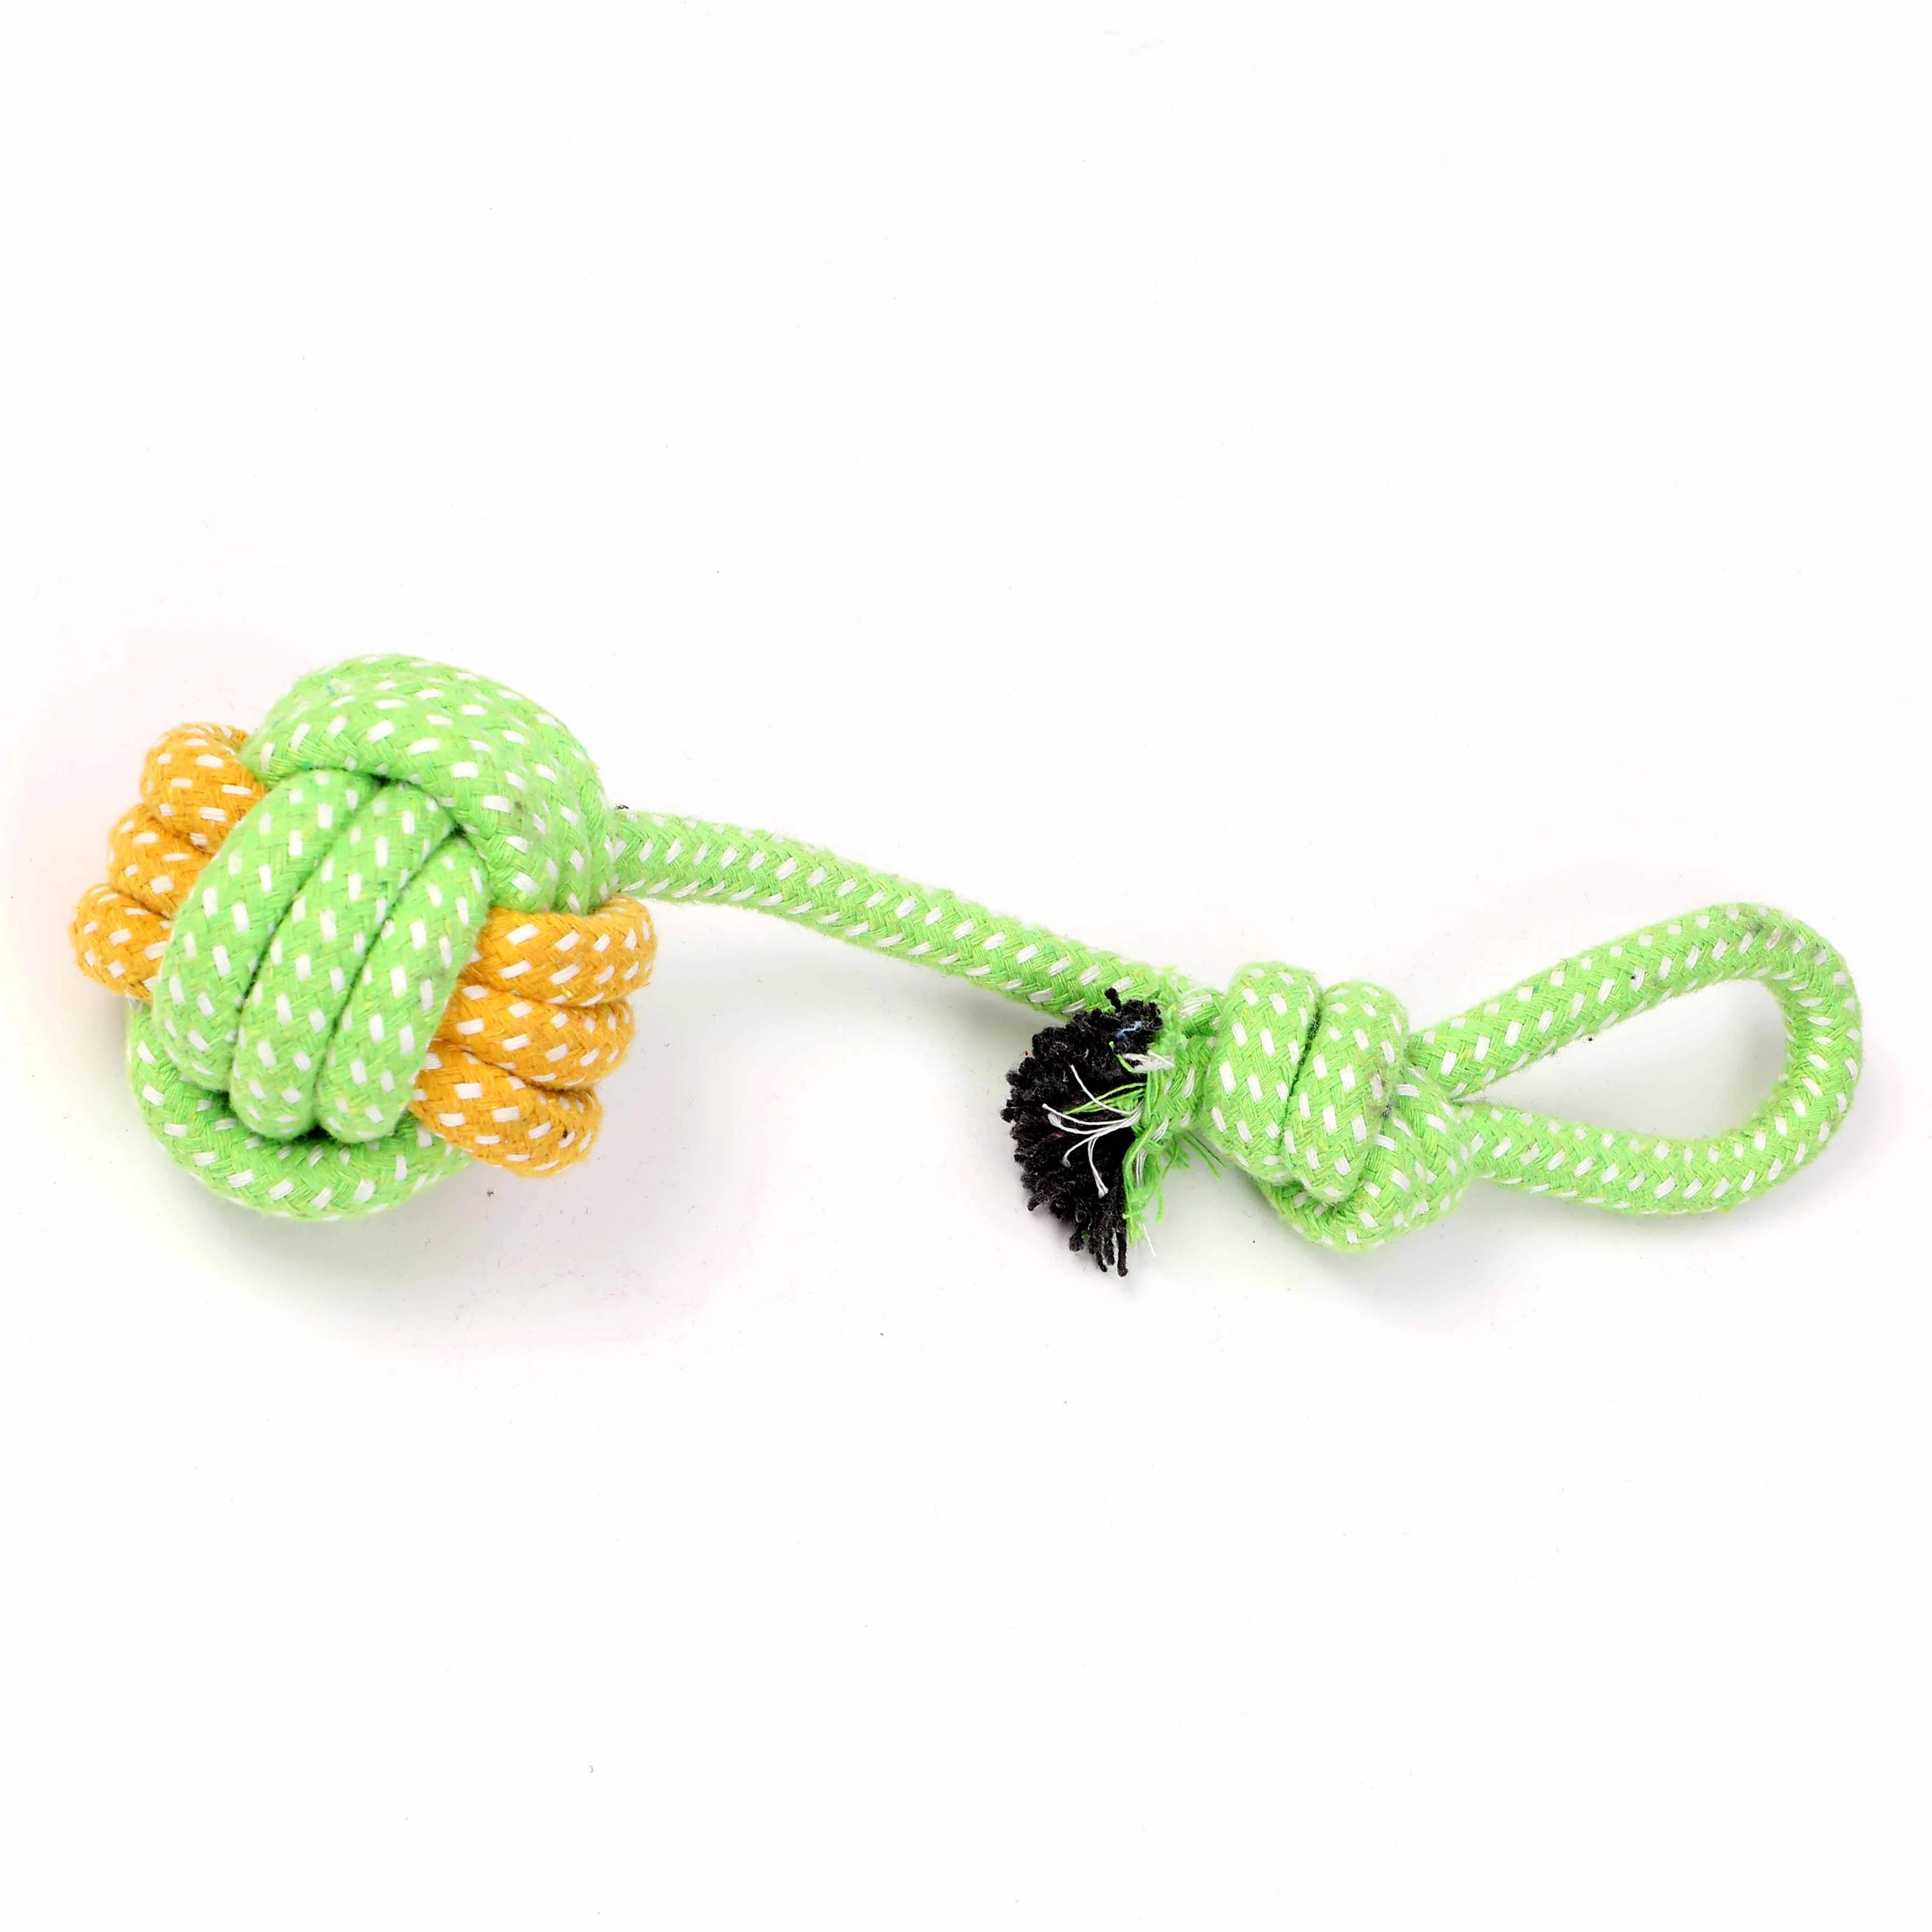 2021 new Durable Rope Dog Chew toy Pet Dog Chew Interactive Toys Safe Bite Resistant Dog Rope Chew Toy